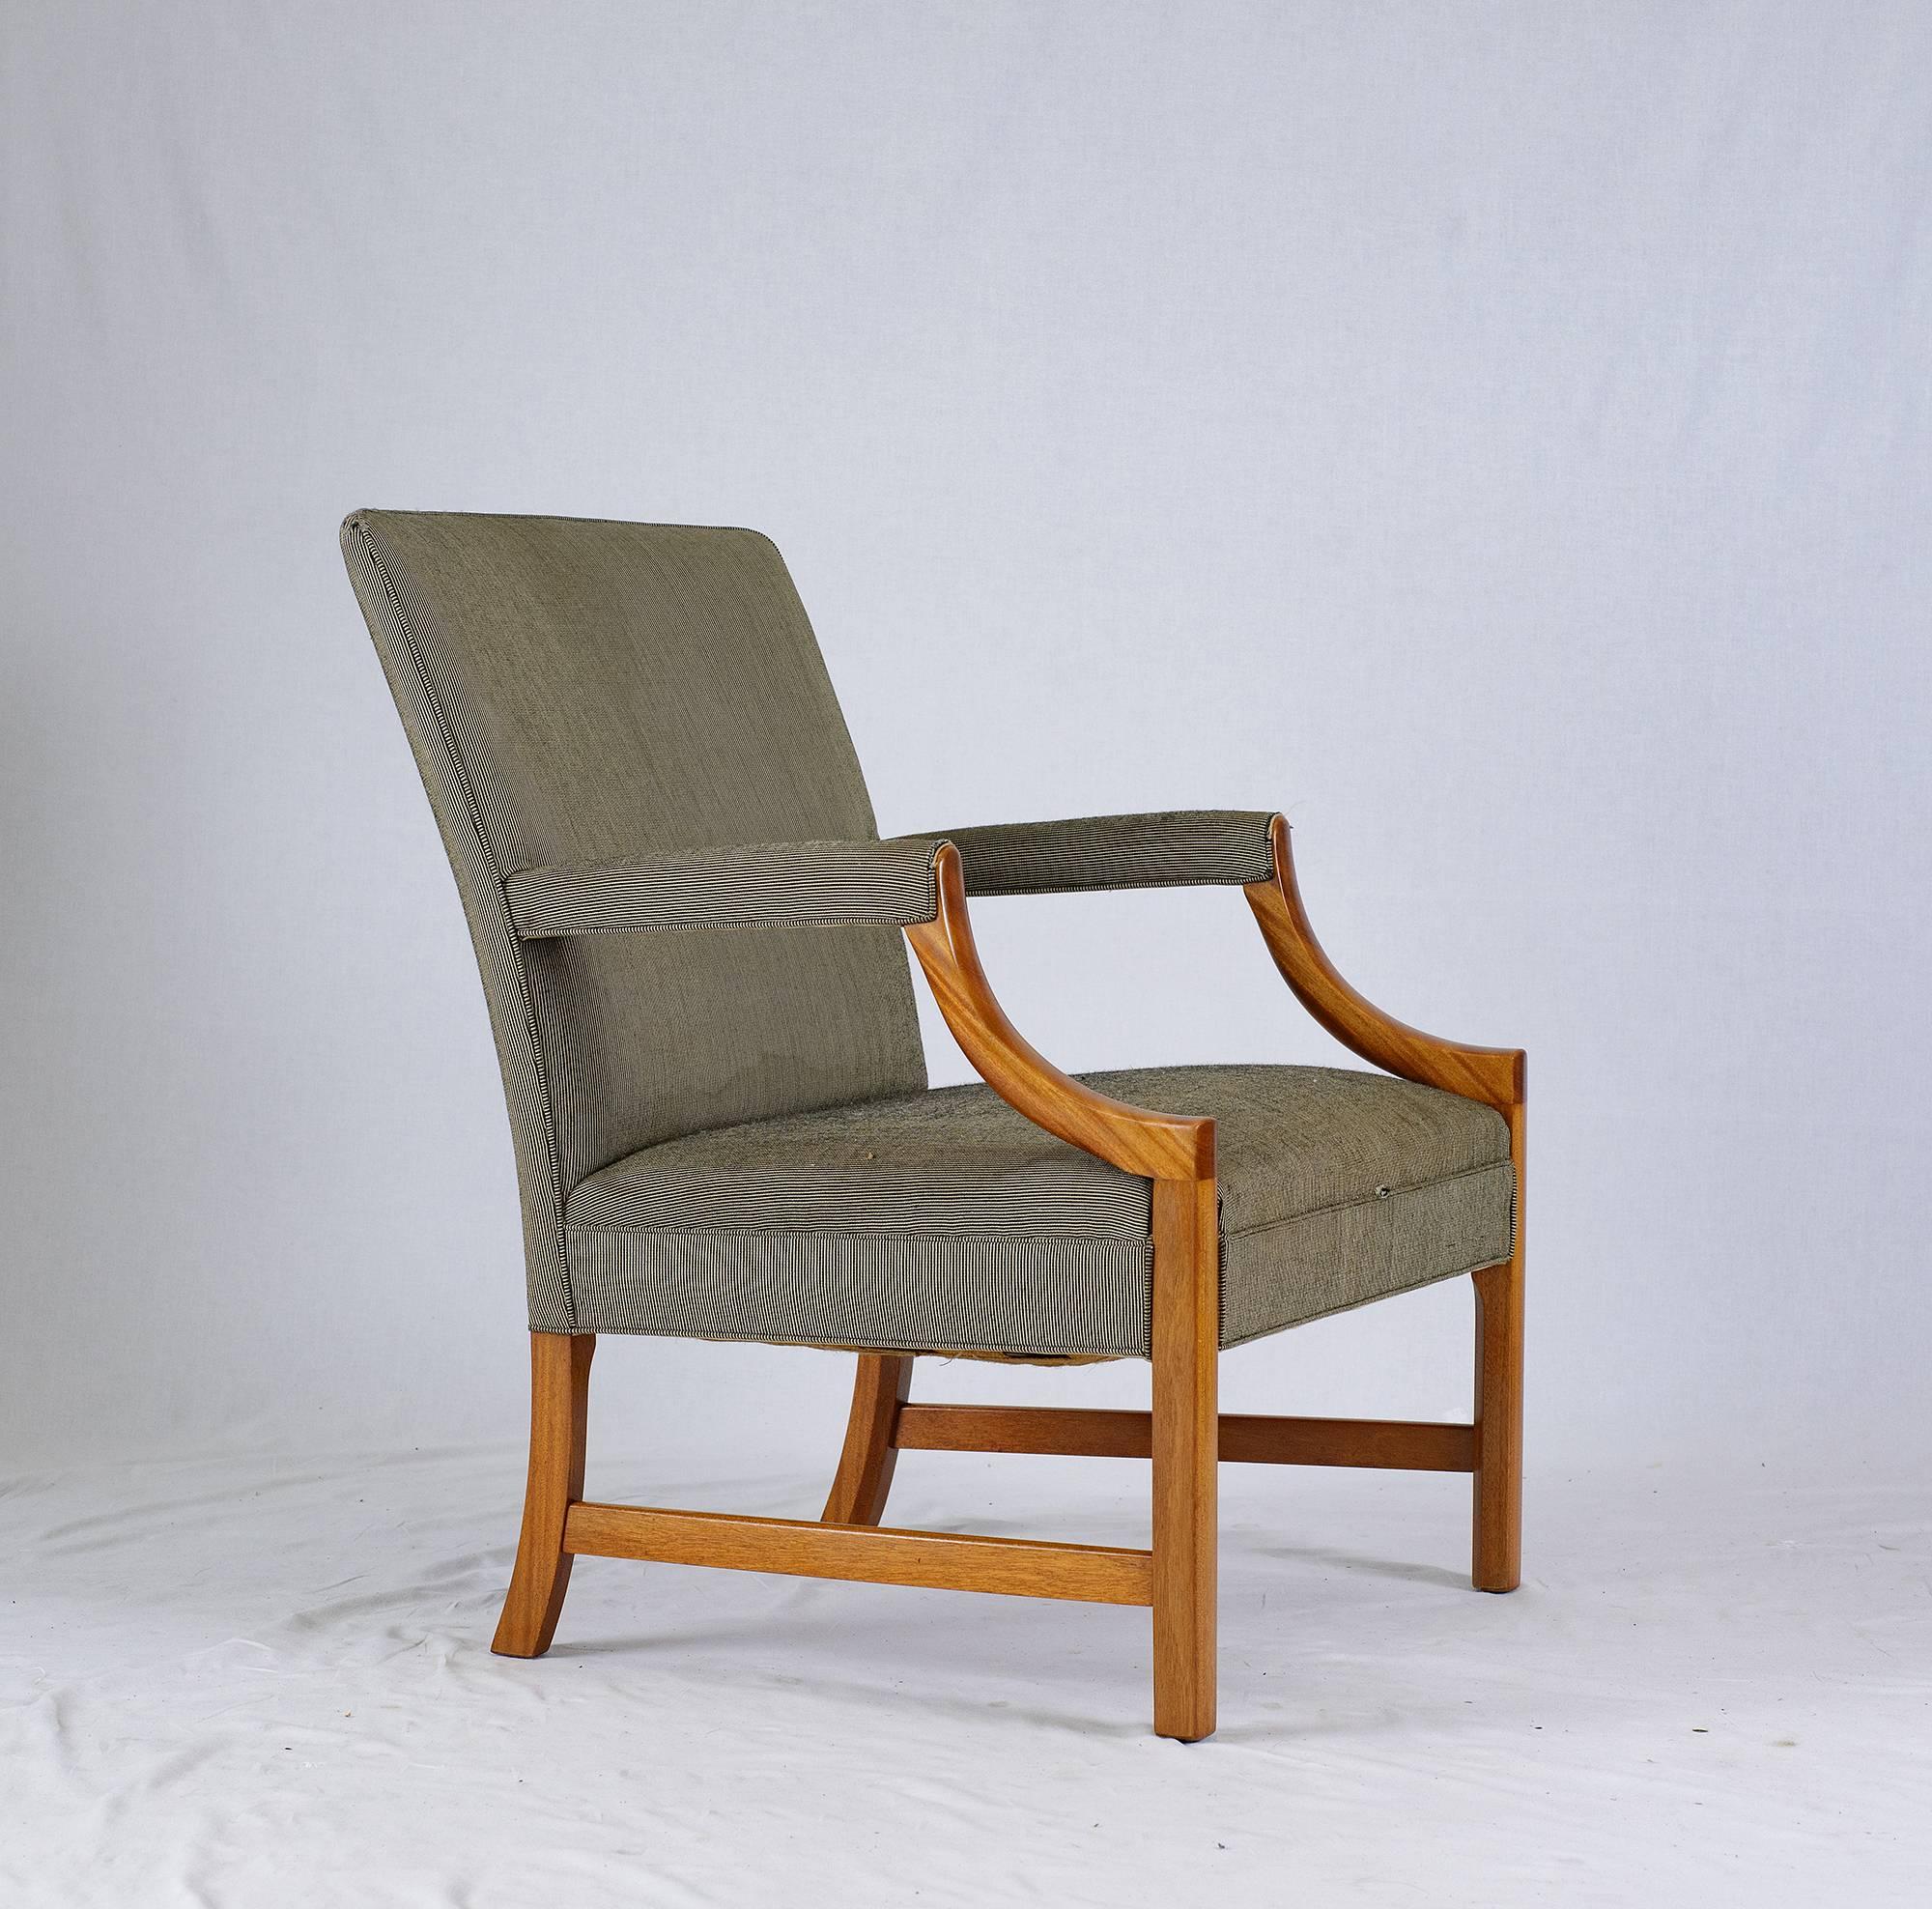 Pair of Ole Wanscher armchairs designed in 1946 and produced by Master Cabinetmaker A. J. Iverson.